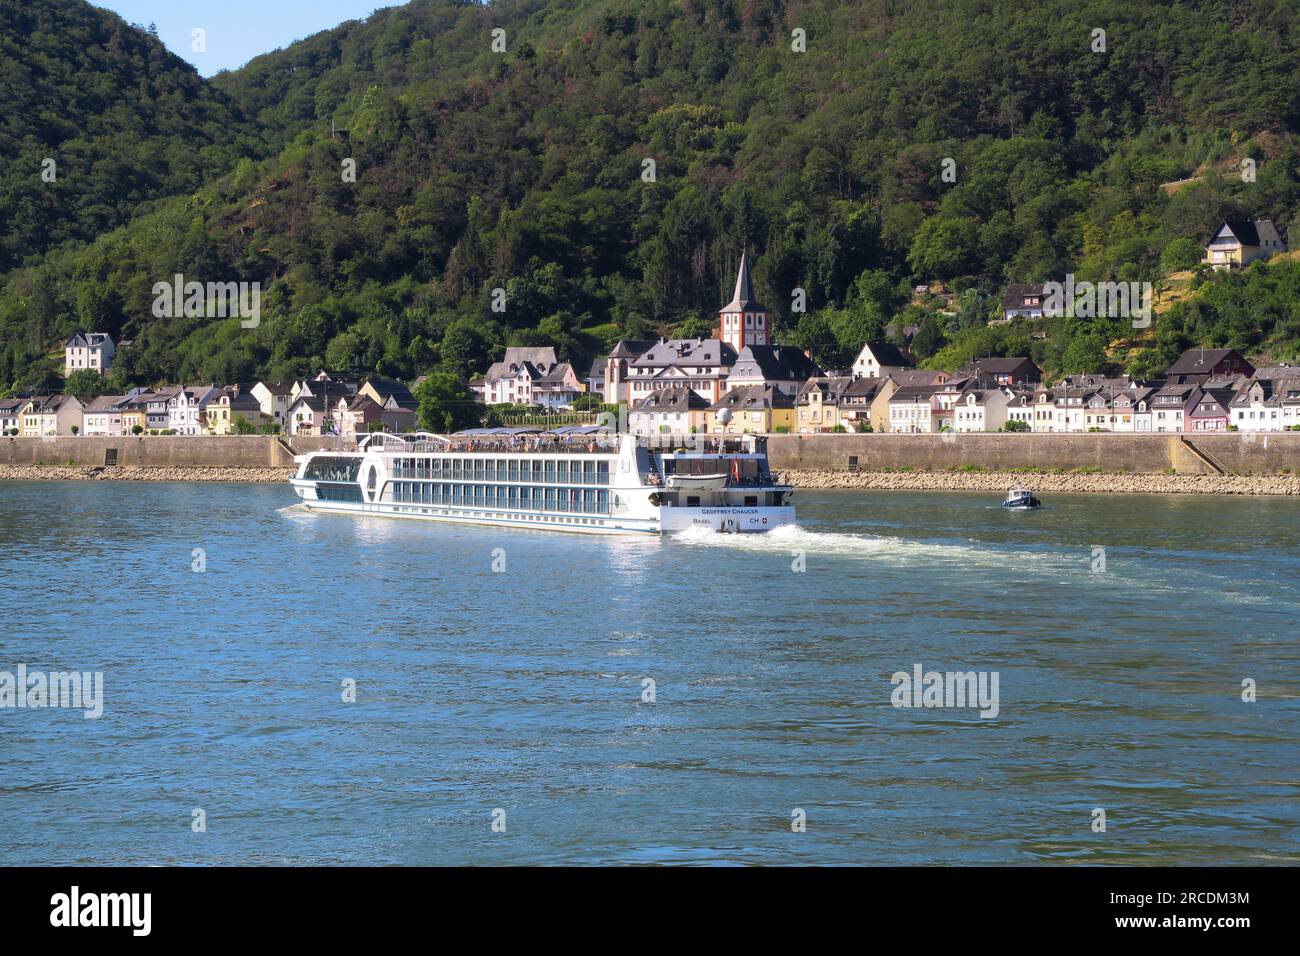 Riviera Travel's MS Geoffrey Chaucer sails towards the German town of Hizenach on the banks of the River Rhine Stock Photo